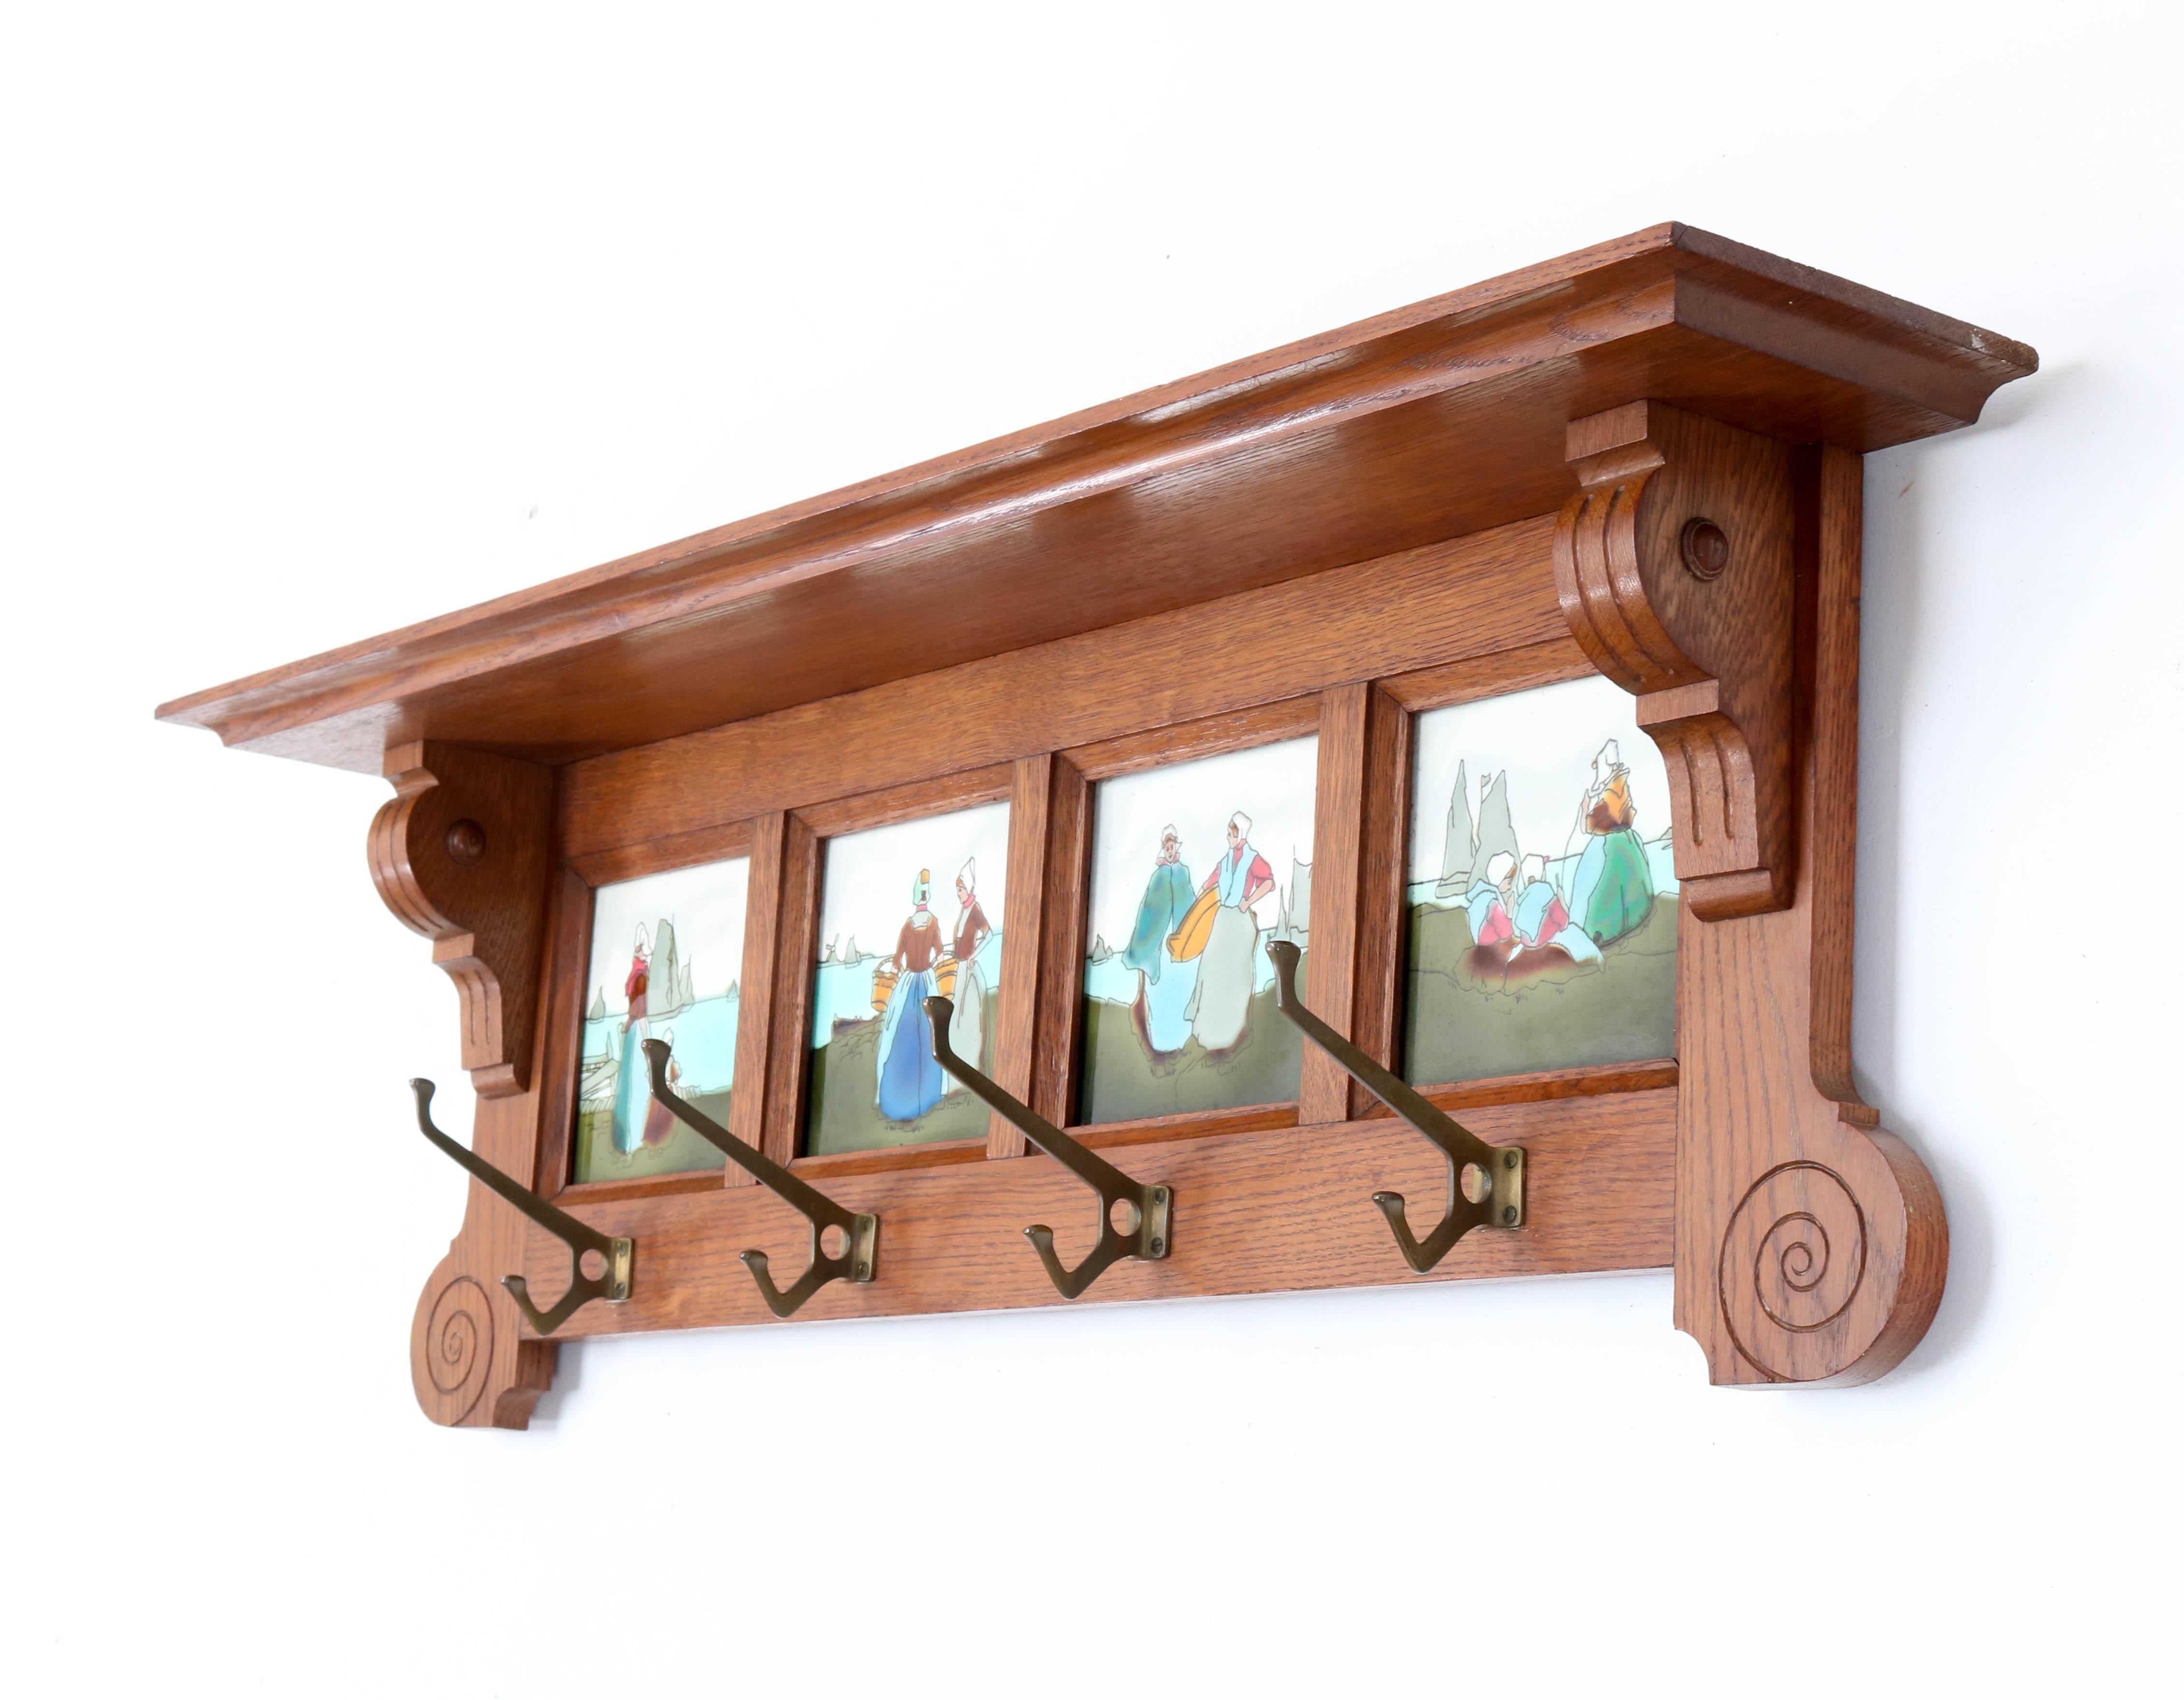 Stunning and rare Art Nouveau wall coat rack.
Striking Belgium design from the 1900s.
Solid oak with four original ceramic tiles.
In very good condition with a beautiful patina.